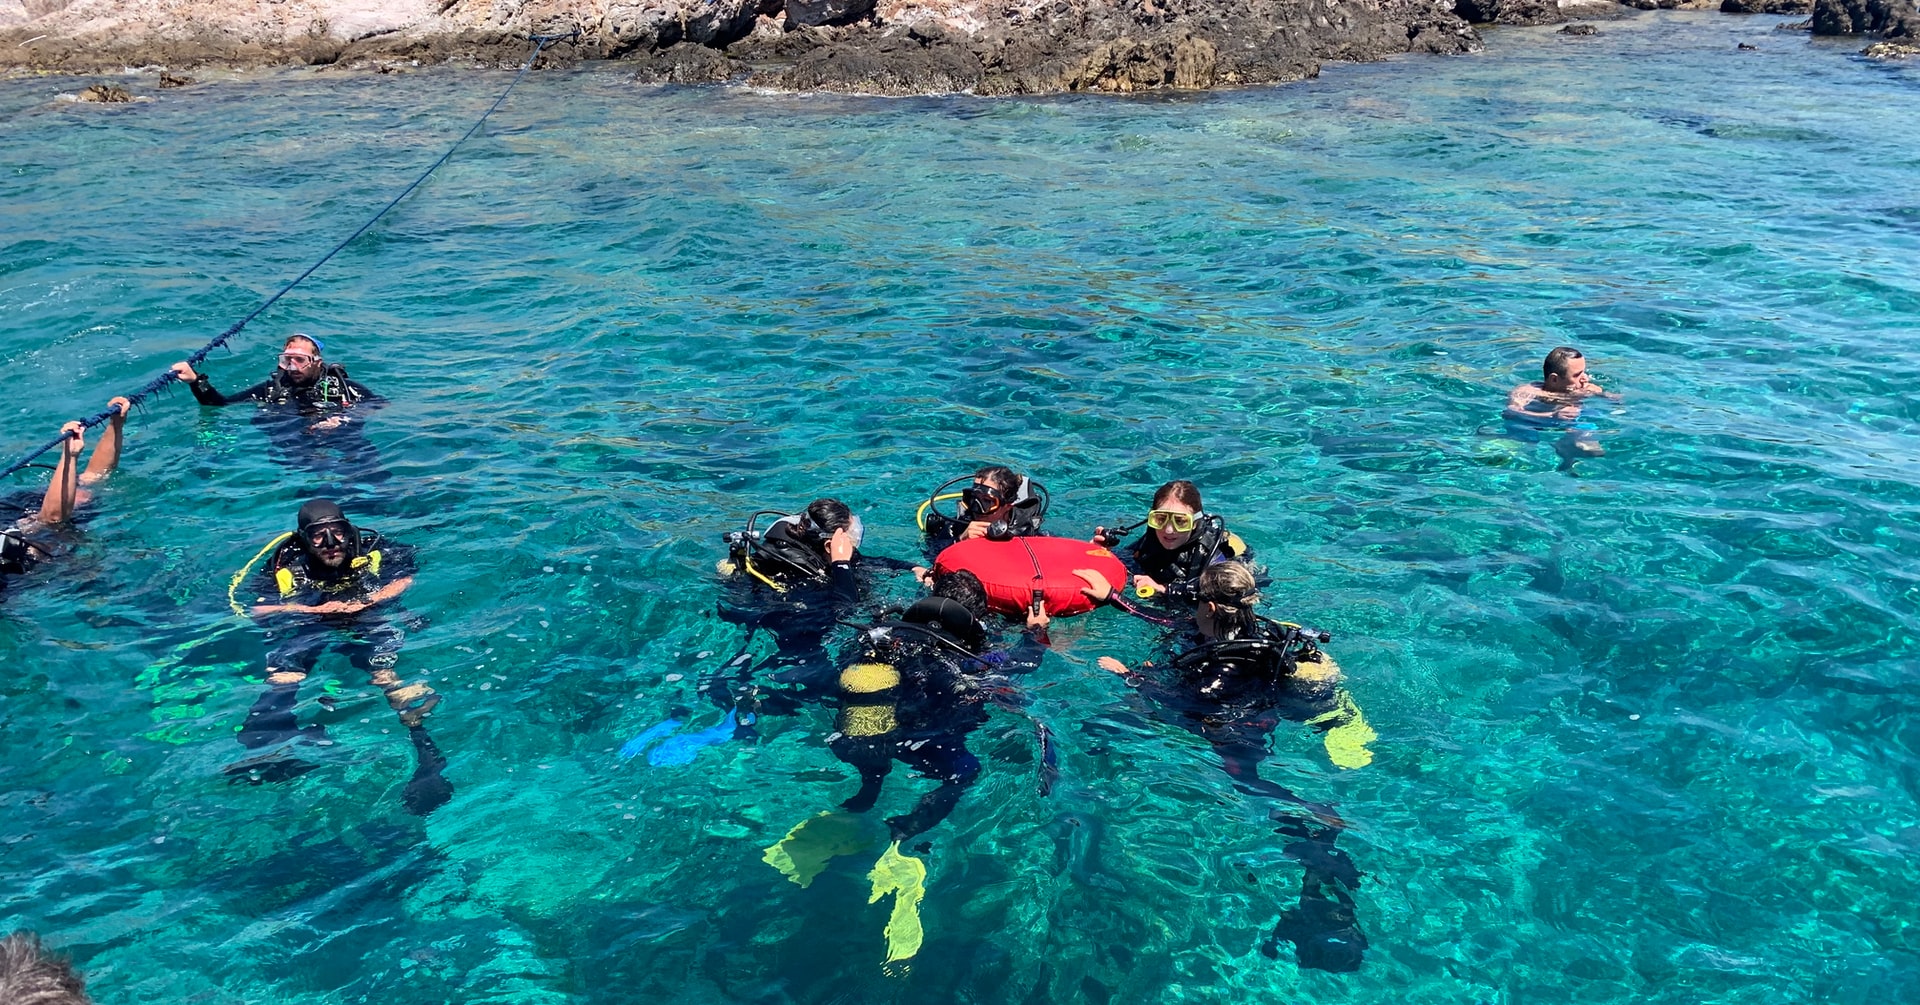 Is Scuba Diving Worth It? (+9 Things Only Divers Can Experience)